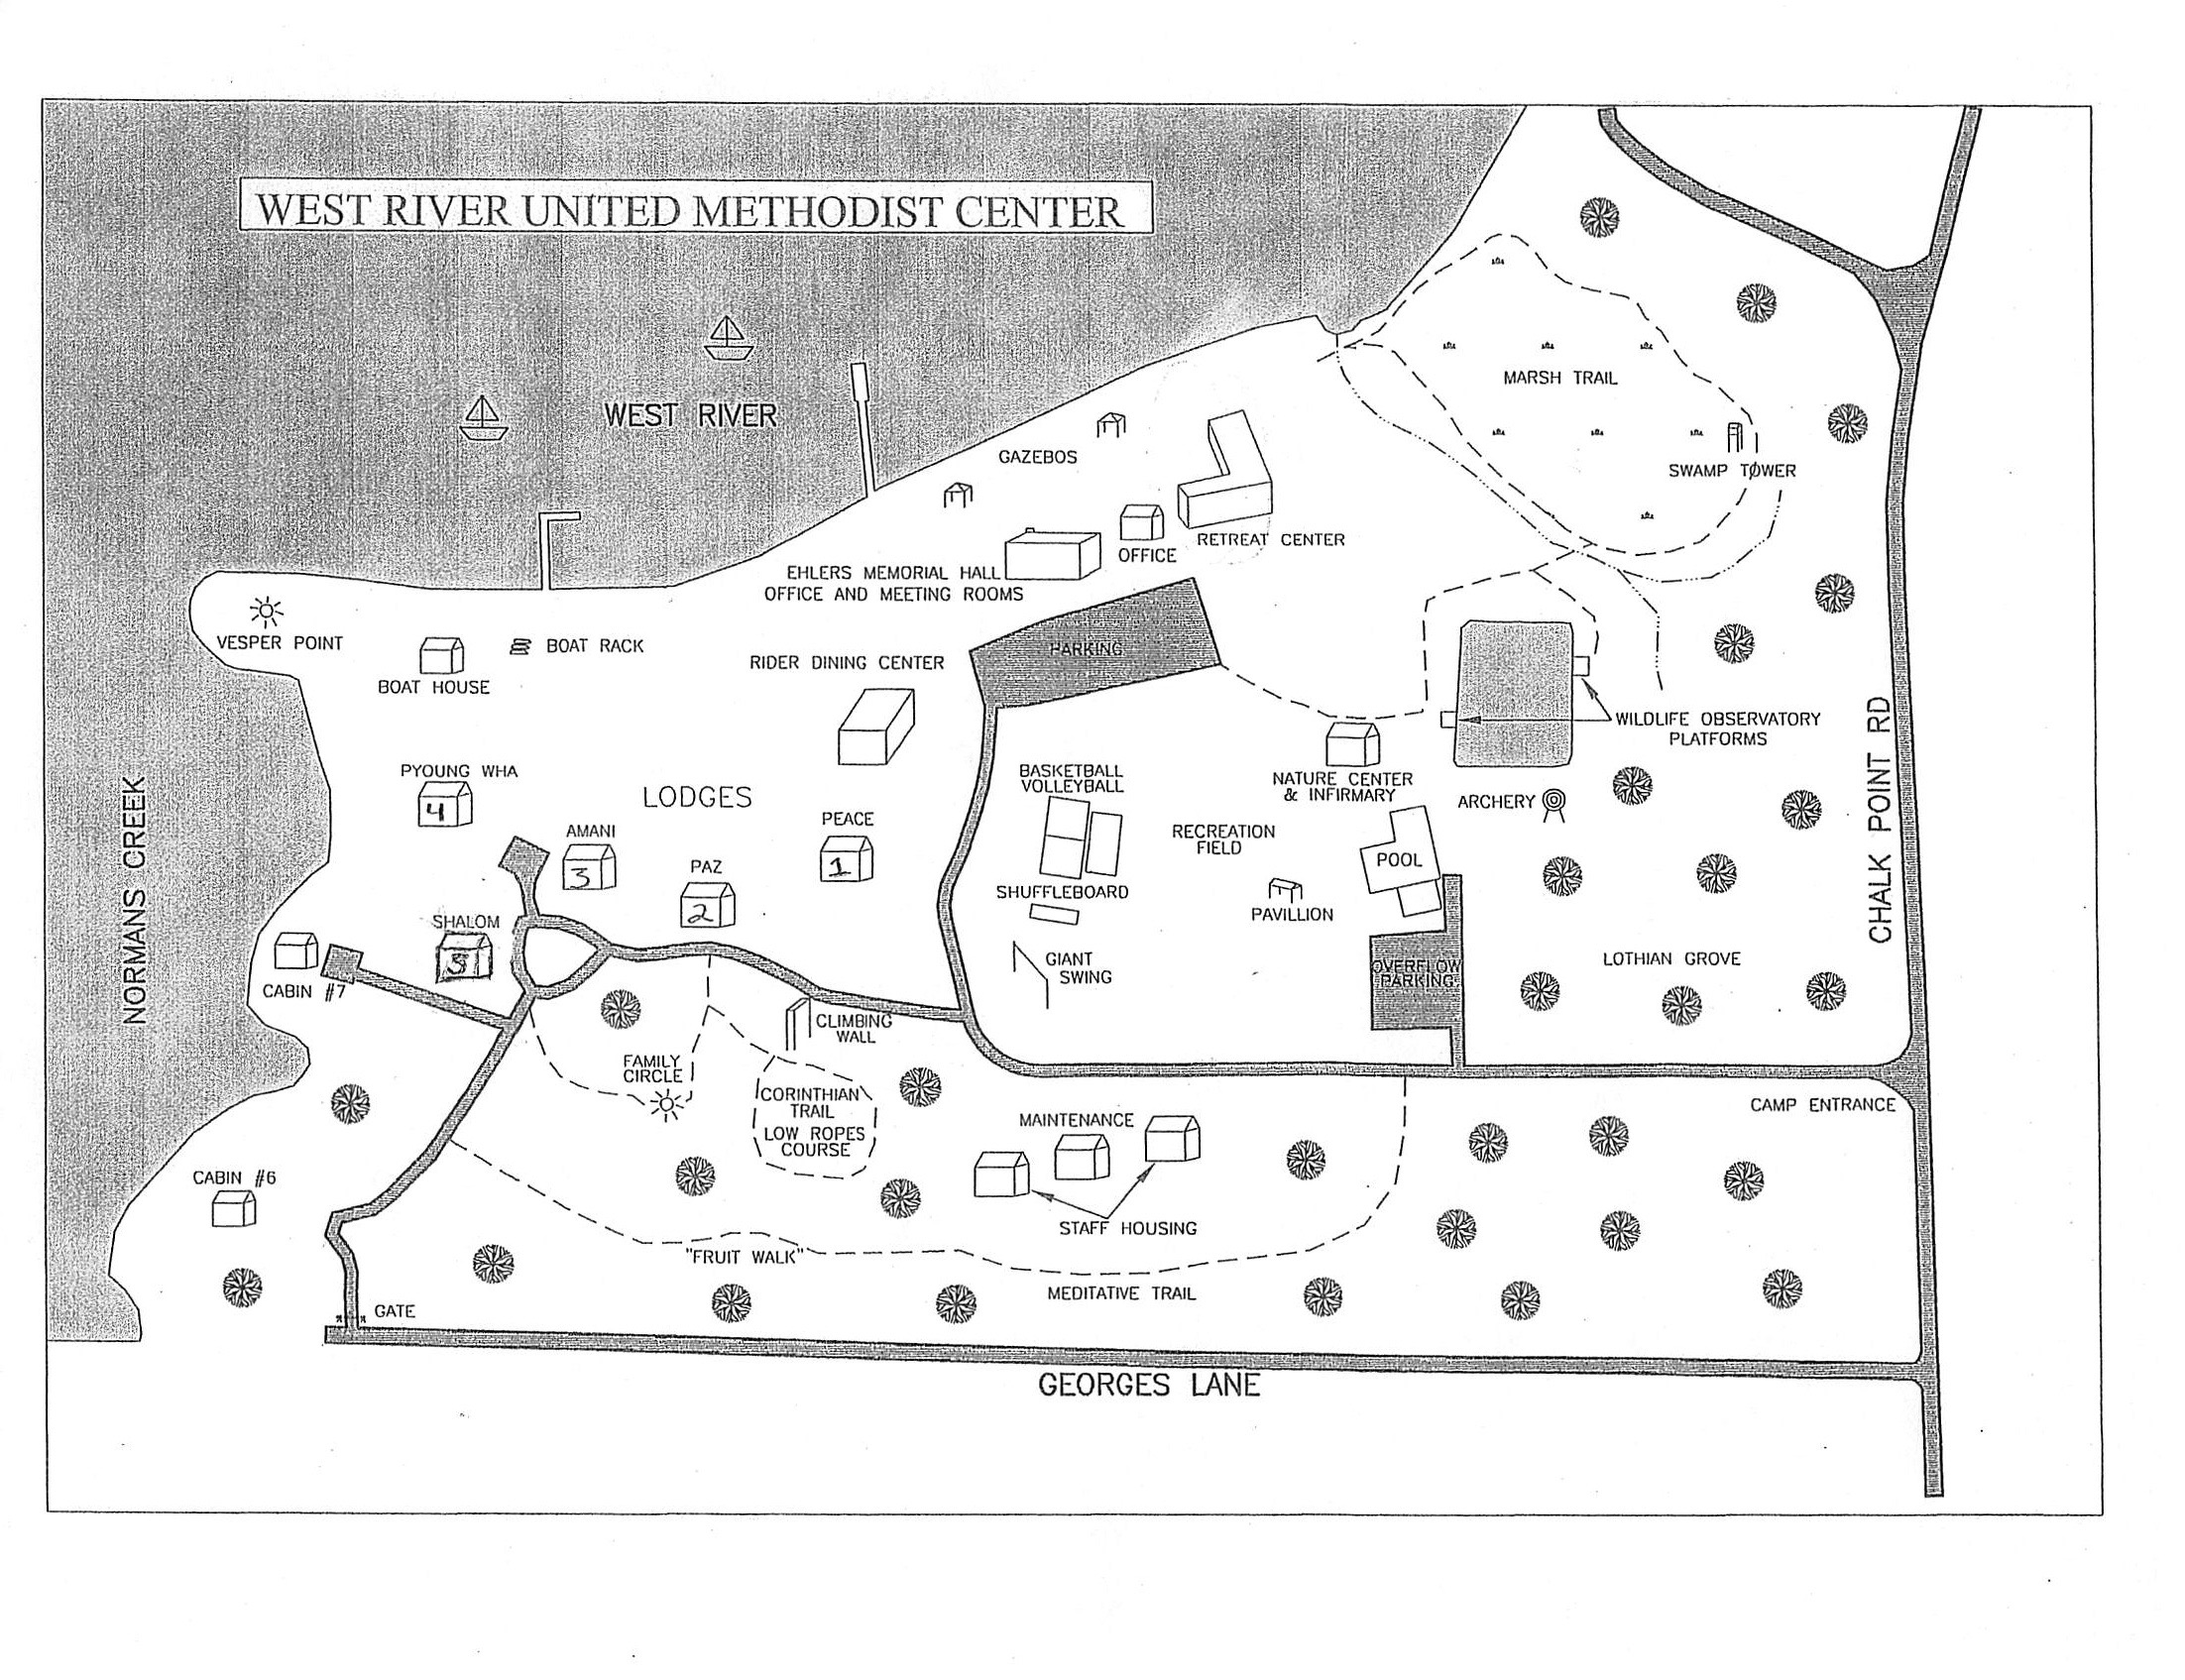 Map of Camp